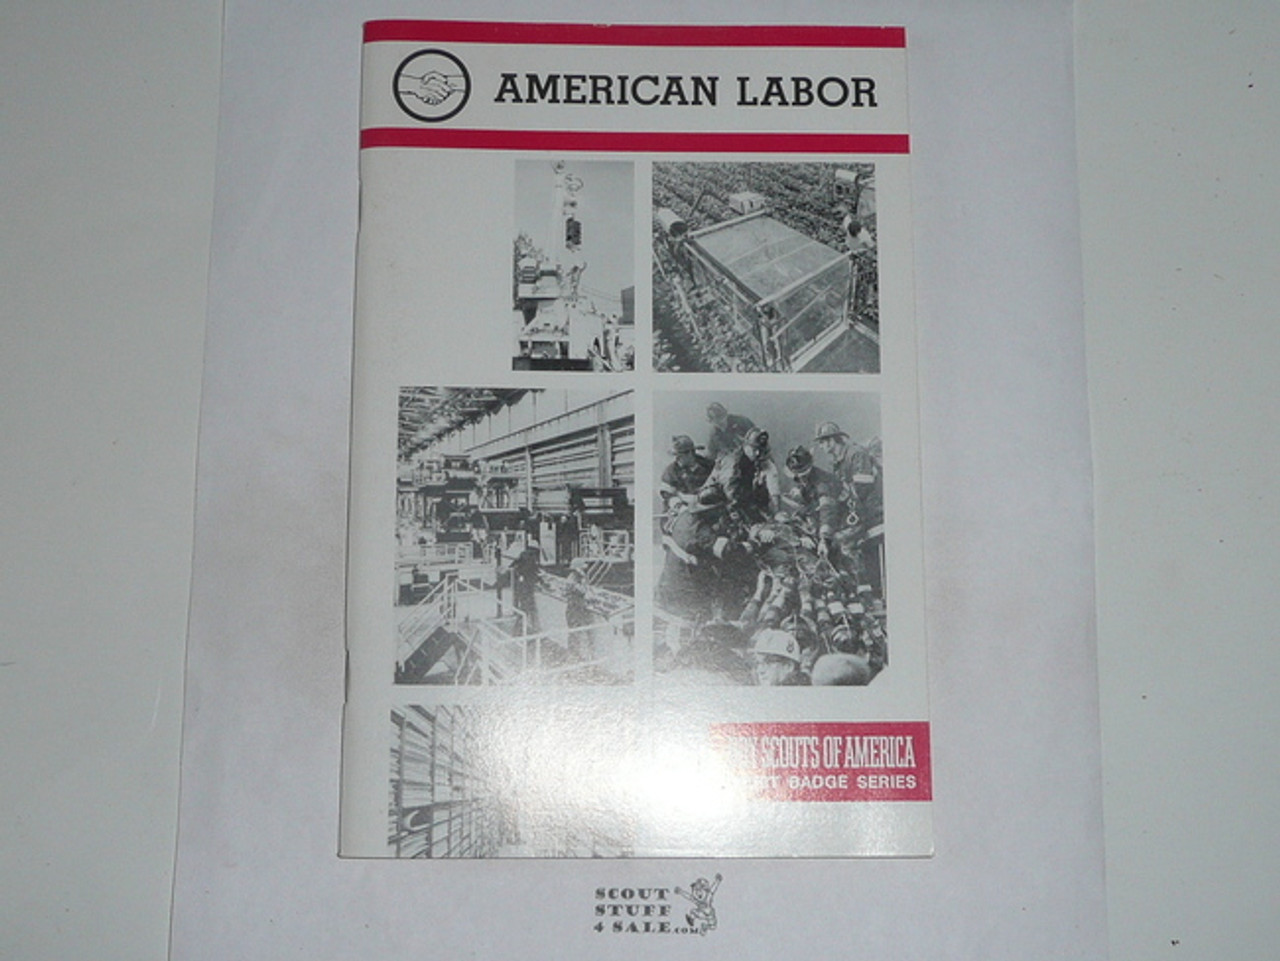 American Labor Merit Badge Pamphlet, Type 9, Red Band Cover, 9-87 Printing